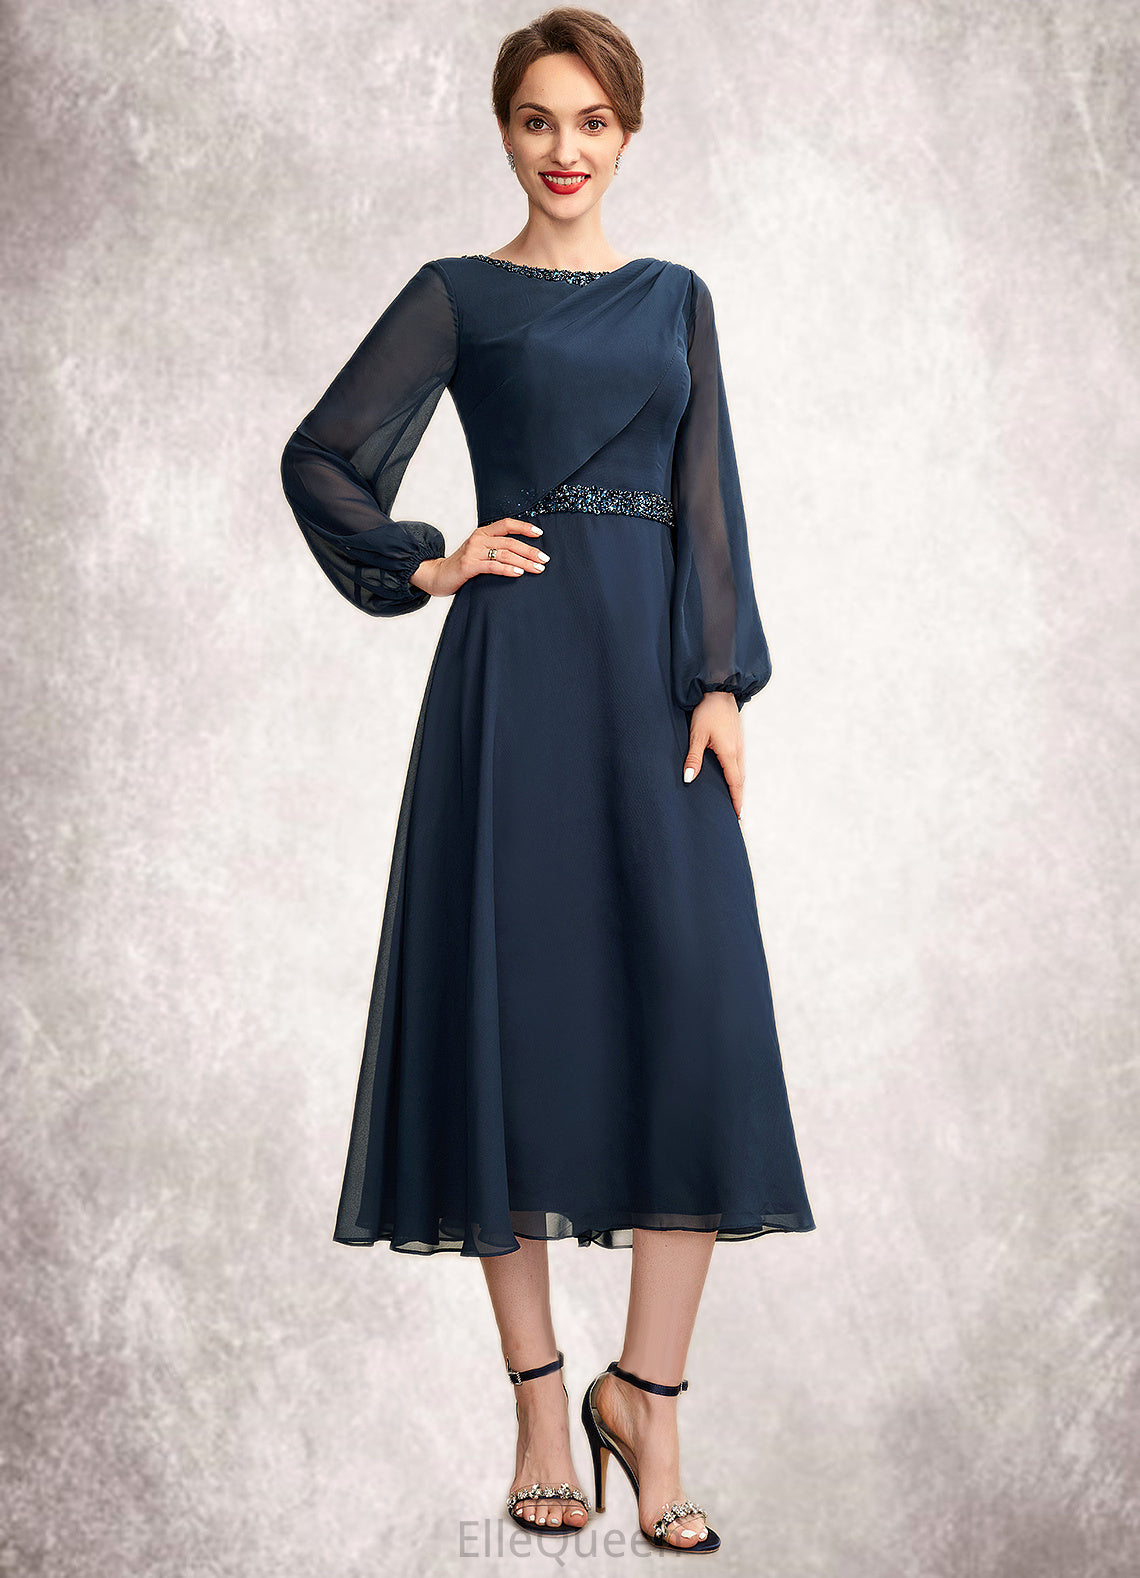 Samantha A-Line Scoop Neck Tea-Length Chiffon Mother of the Bride Dress With Beading Sequins DG126P0015018